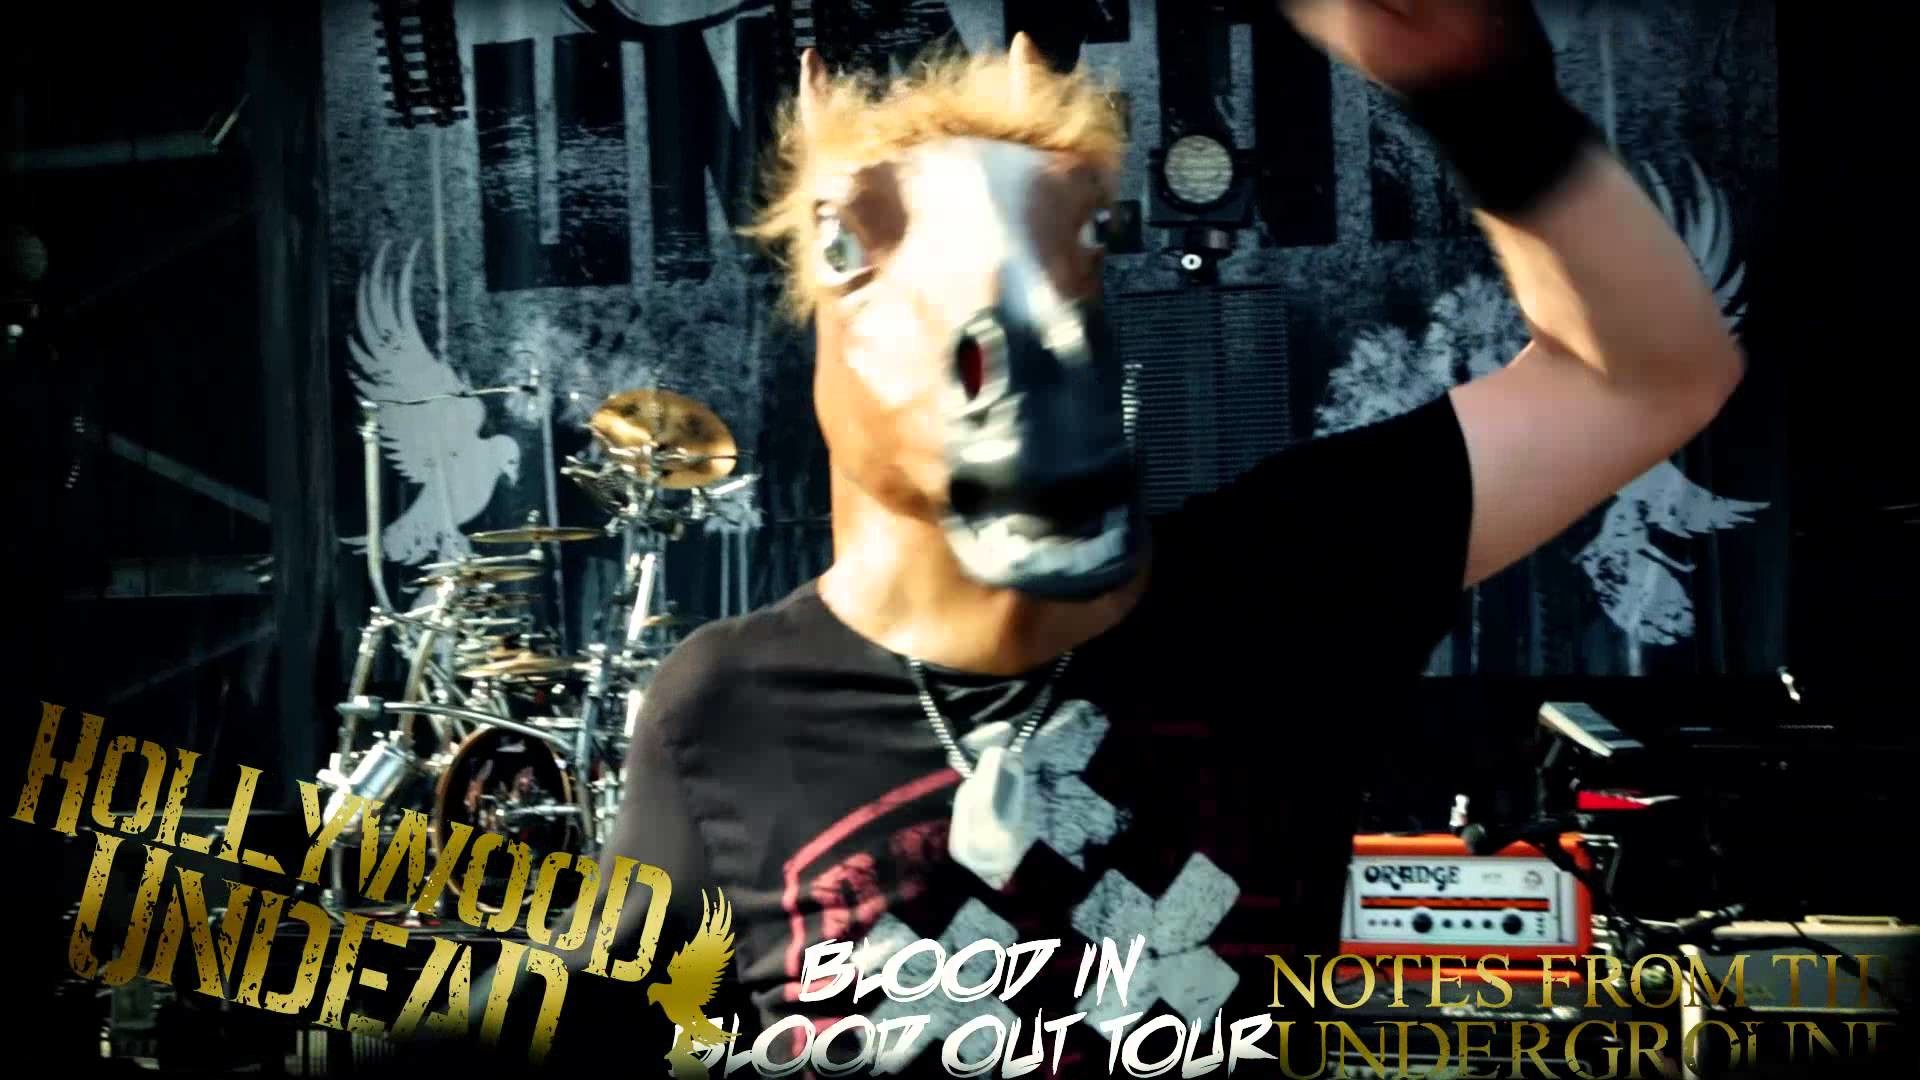 1920x1080 Blood In Blood Out Tour - Episode #1